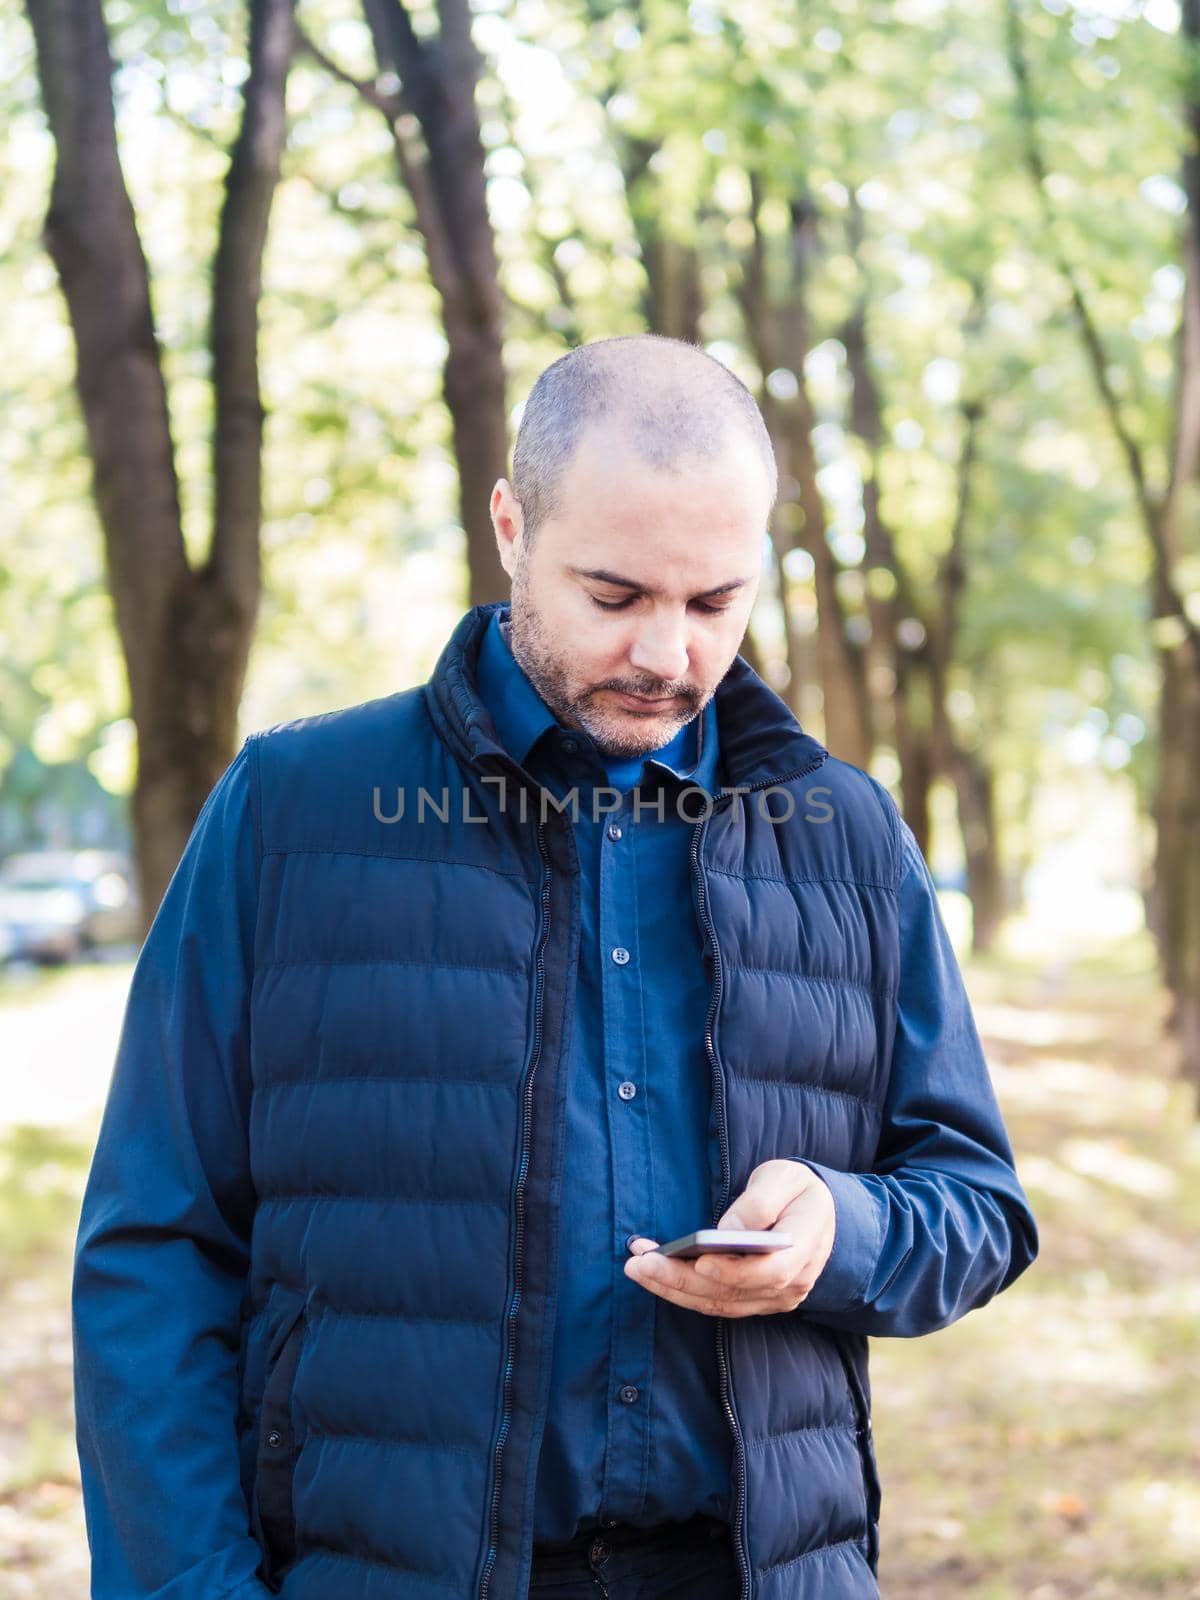 man is holding a phone, walking in the city Park, among the trees and looking at the smartphone.